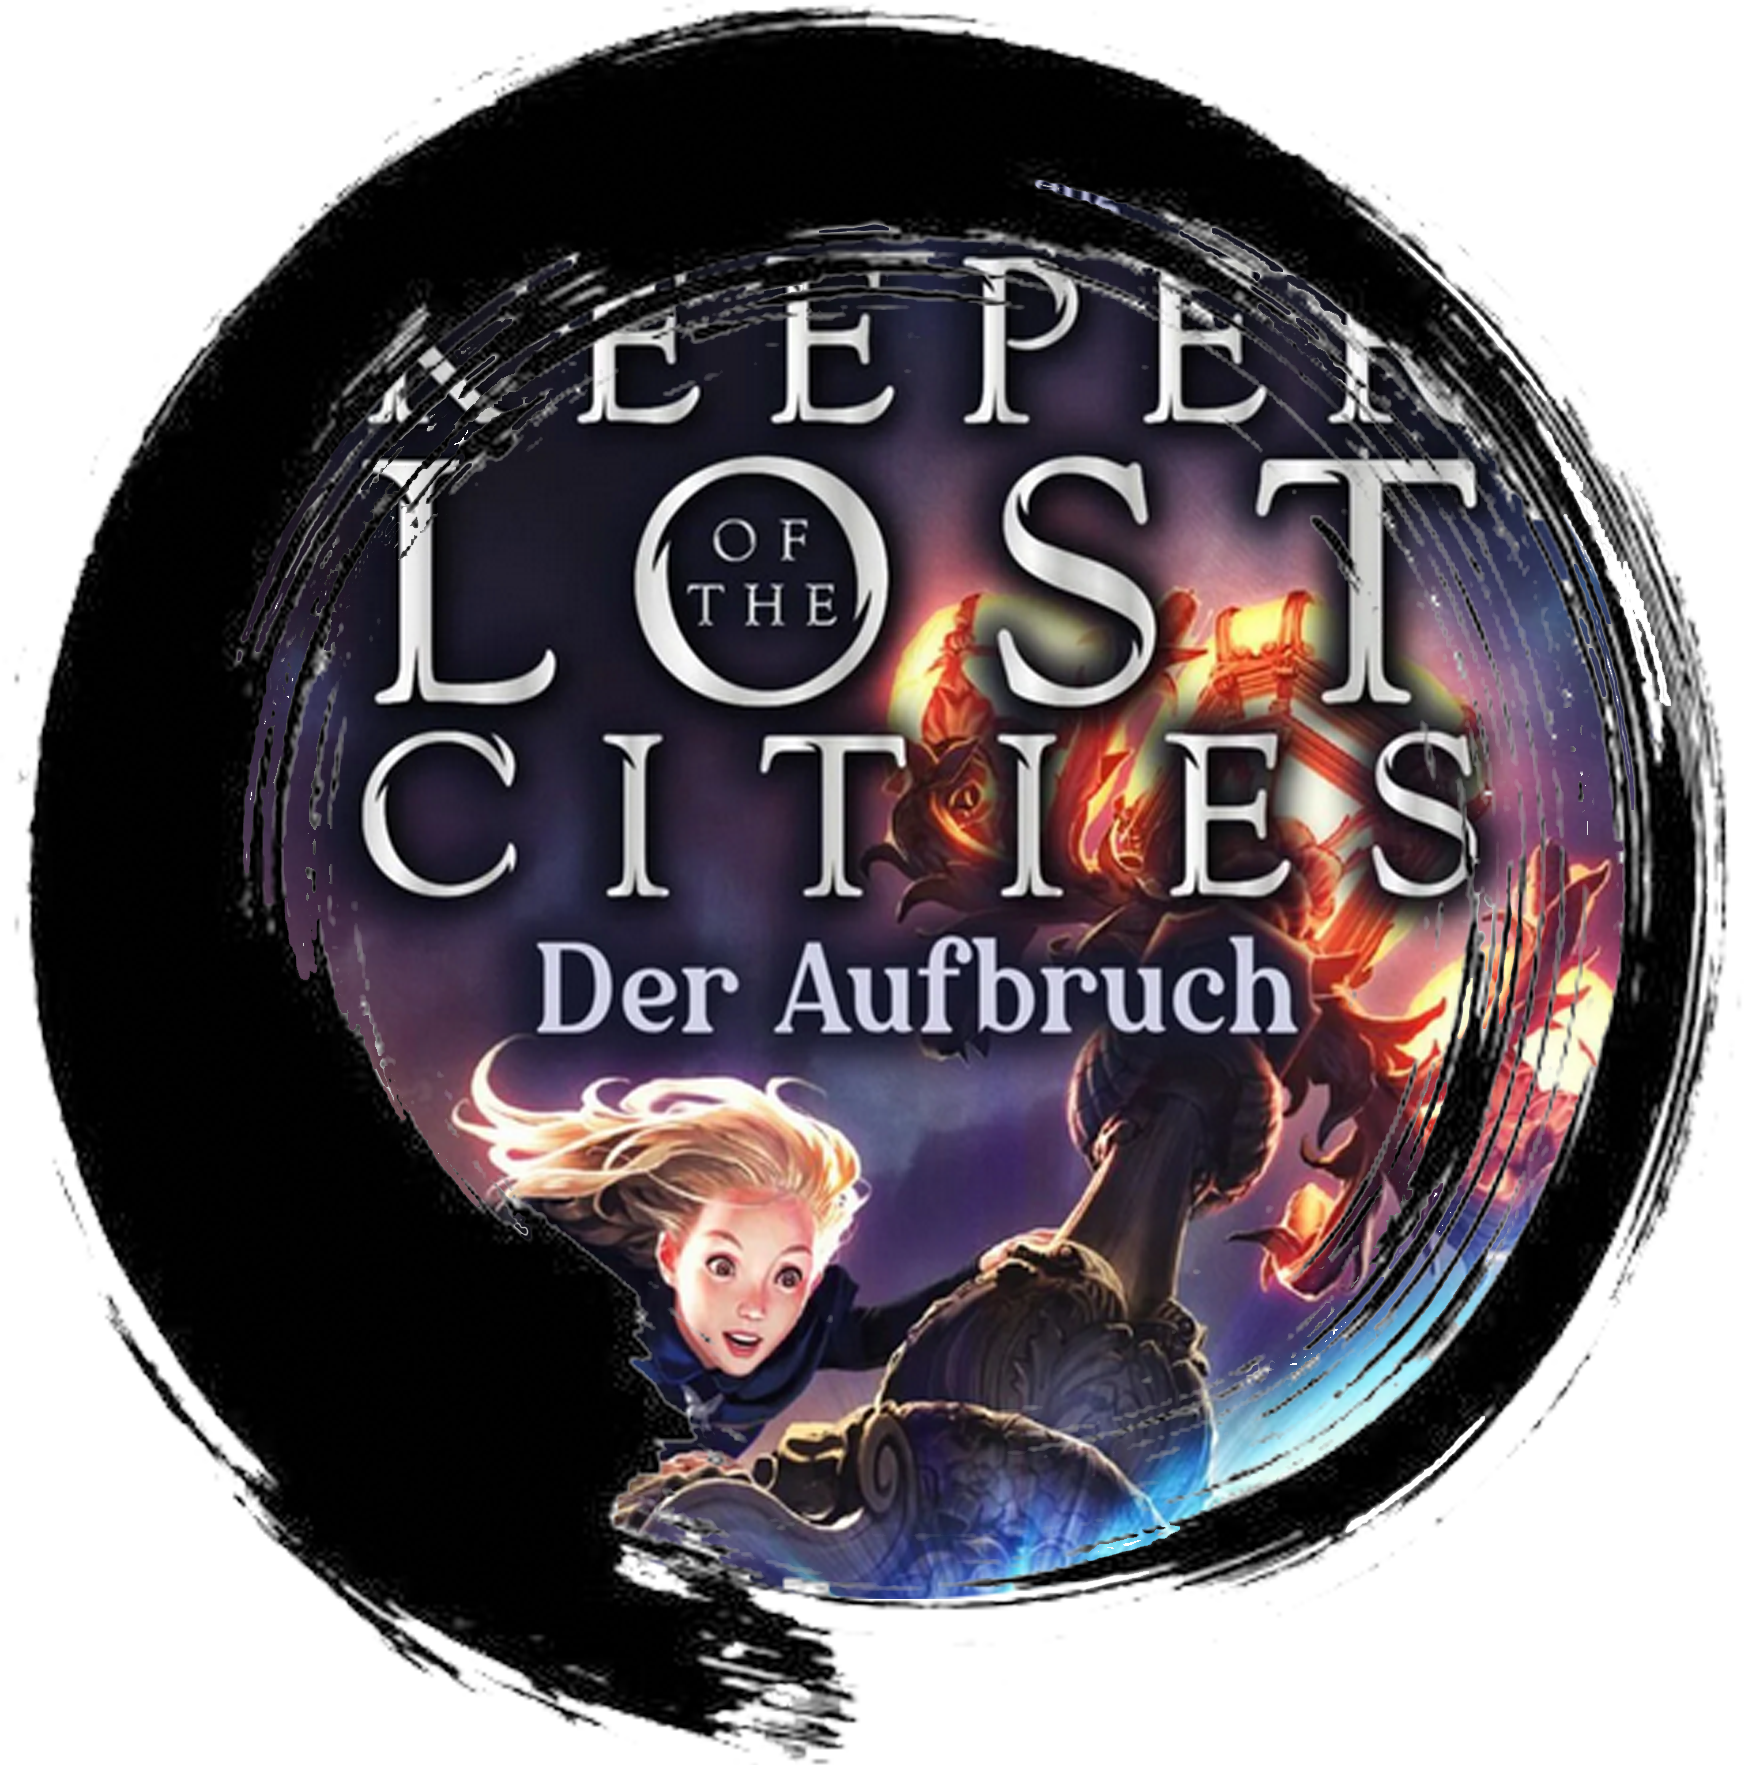 Keeper Lost of the Cities #1 – Der Aufbruch